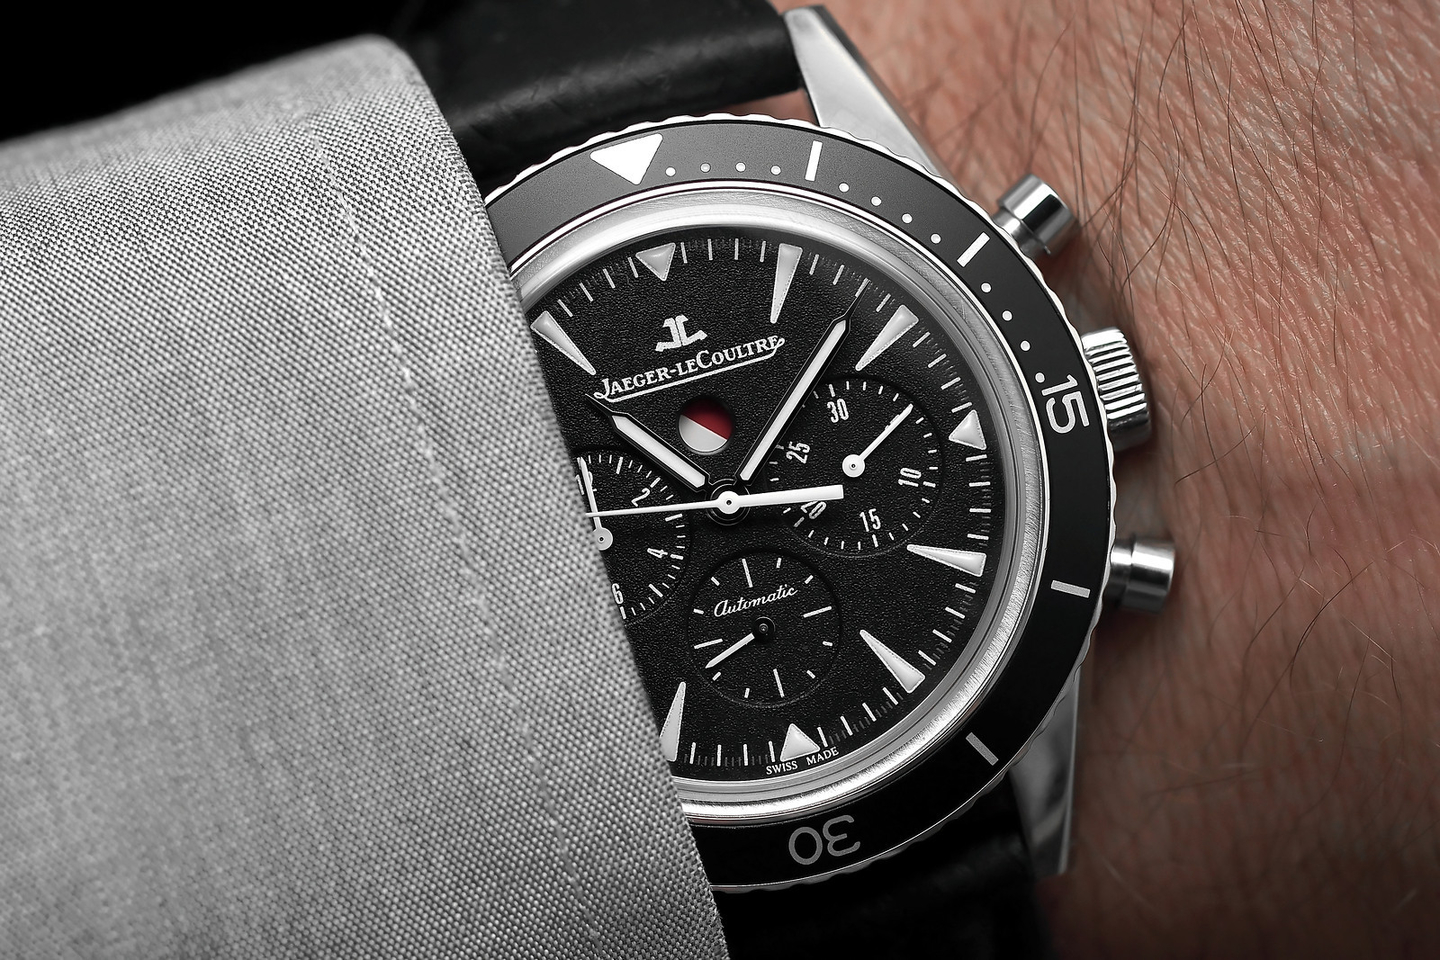 REVIEW: From the Boardroom to the Beach, The Jaeger-LeCoultre Deep Sea Chronograph (Part I)